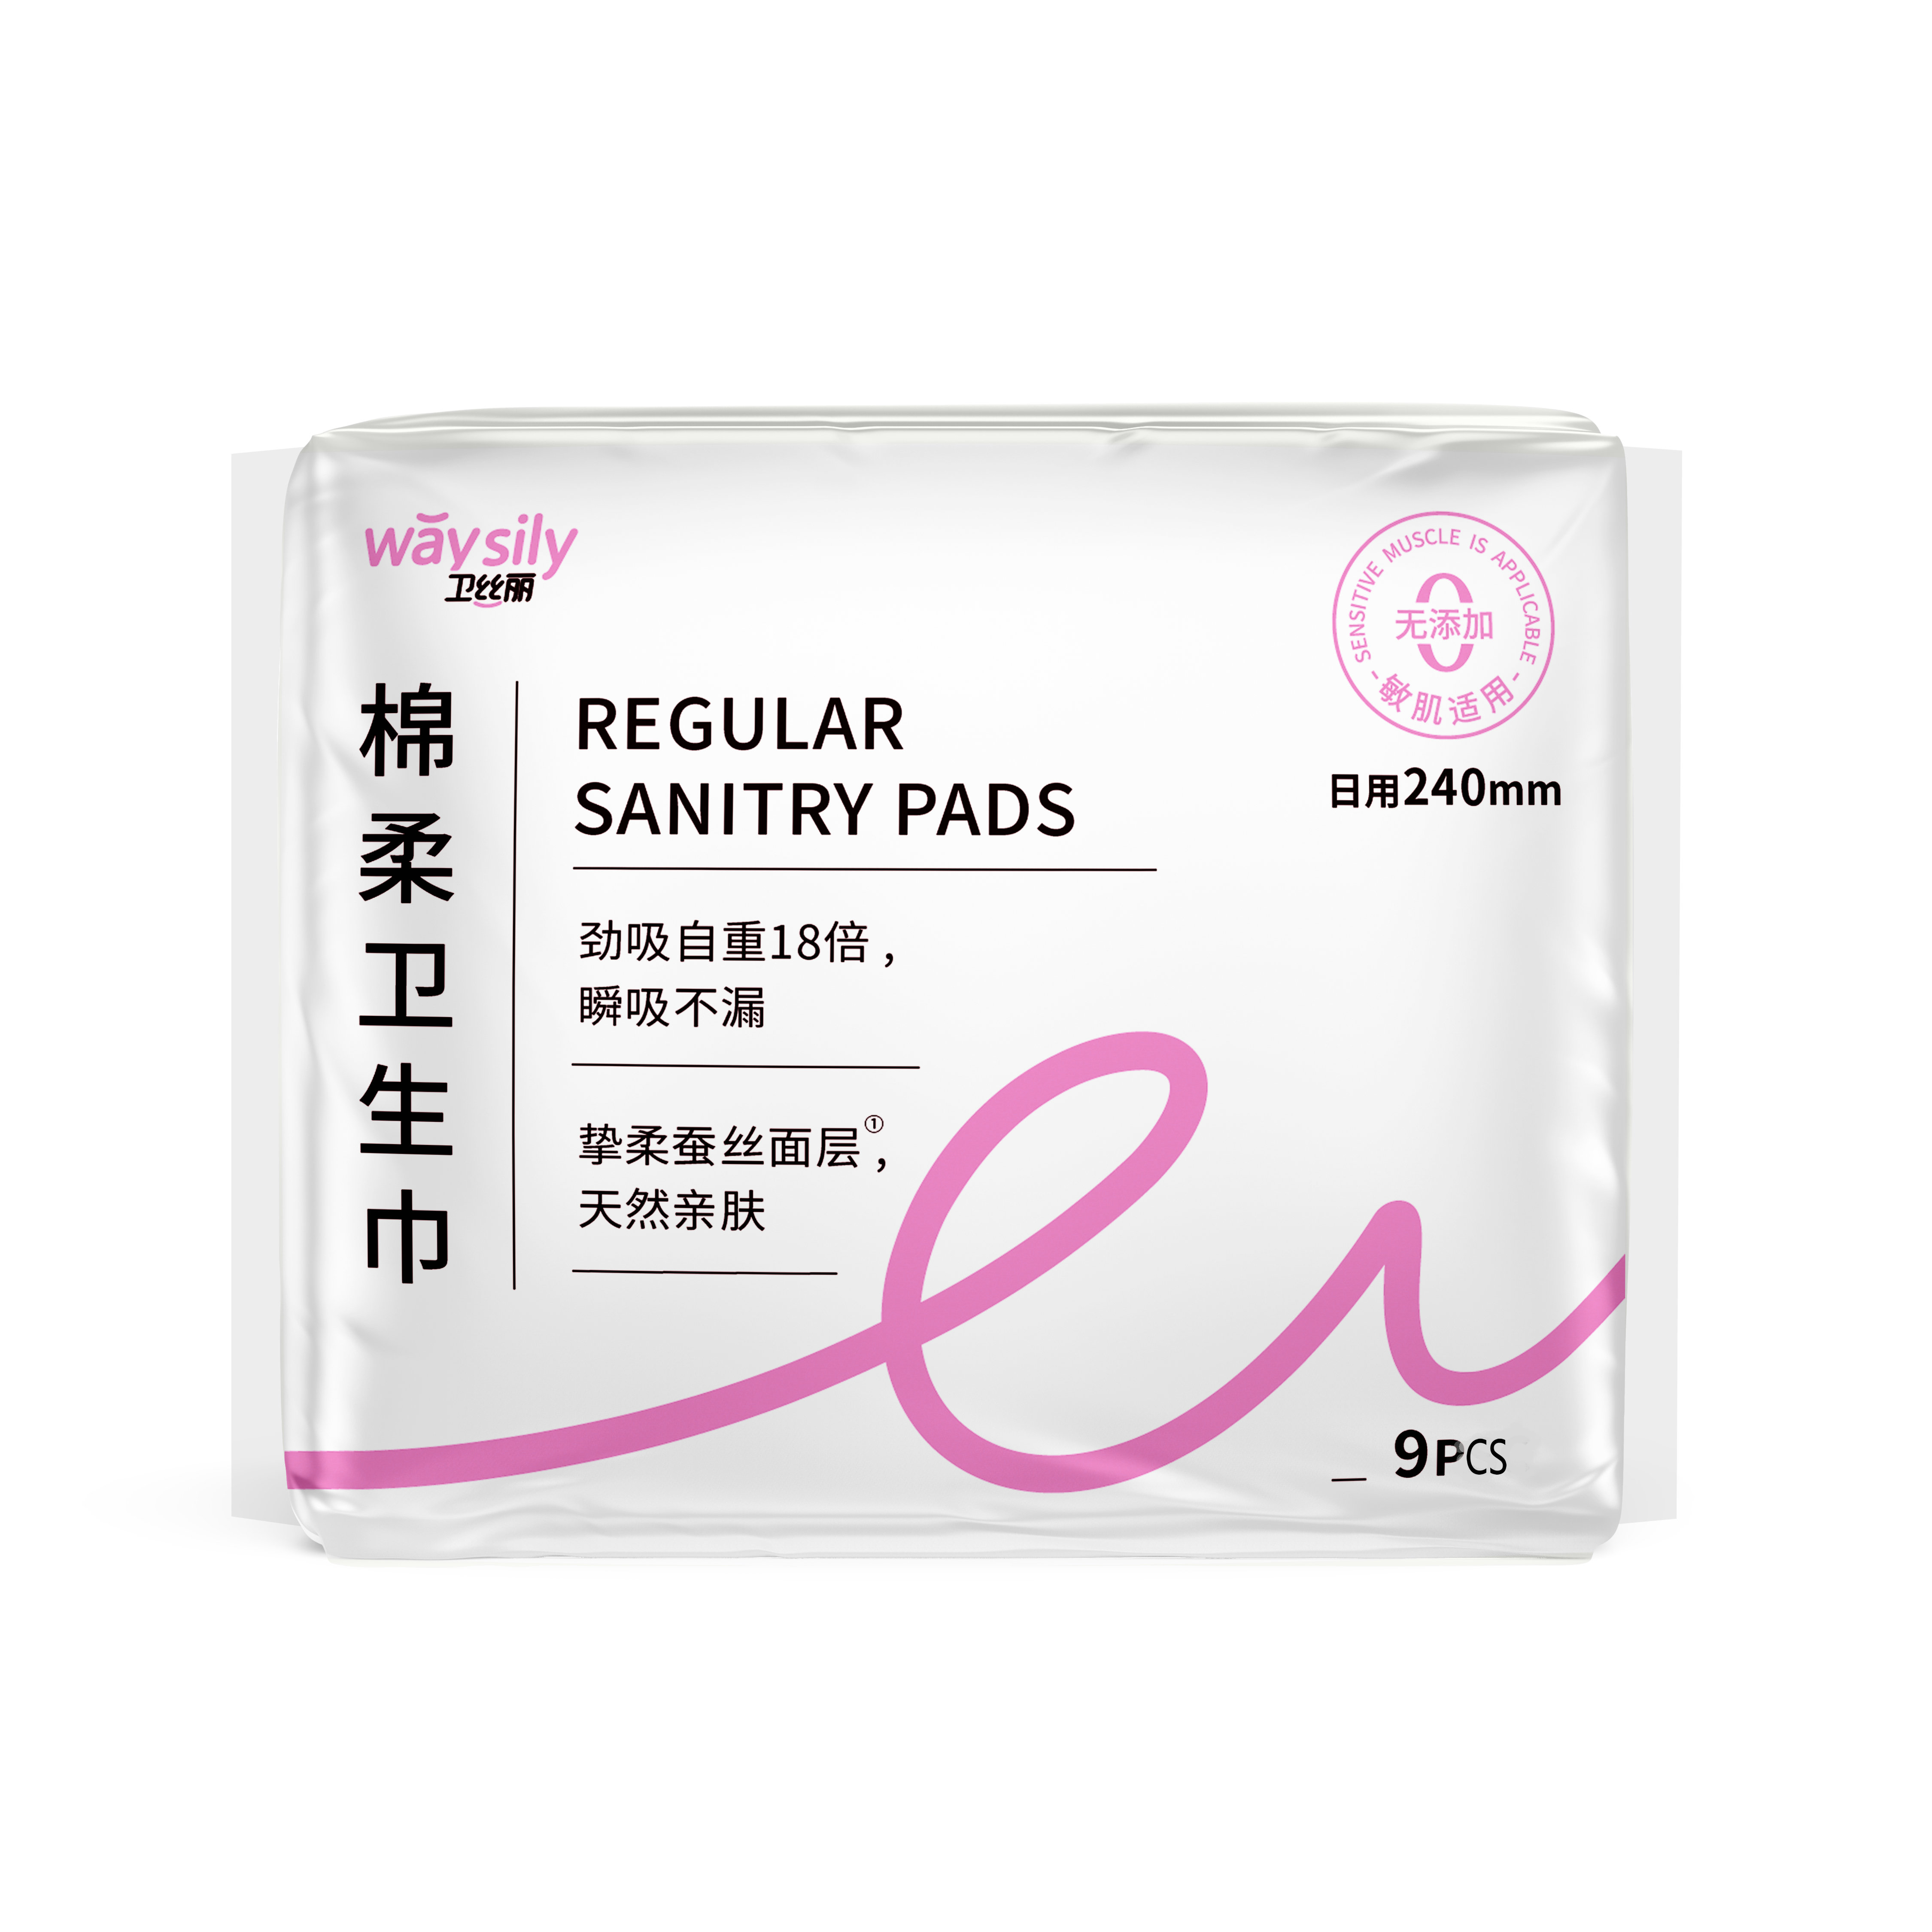 Product Introduction of Soft and Comfy Sanitary Napkins